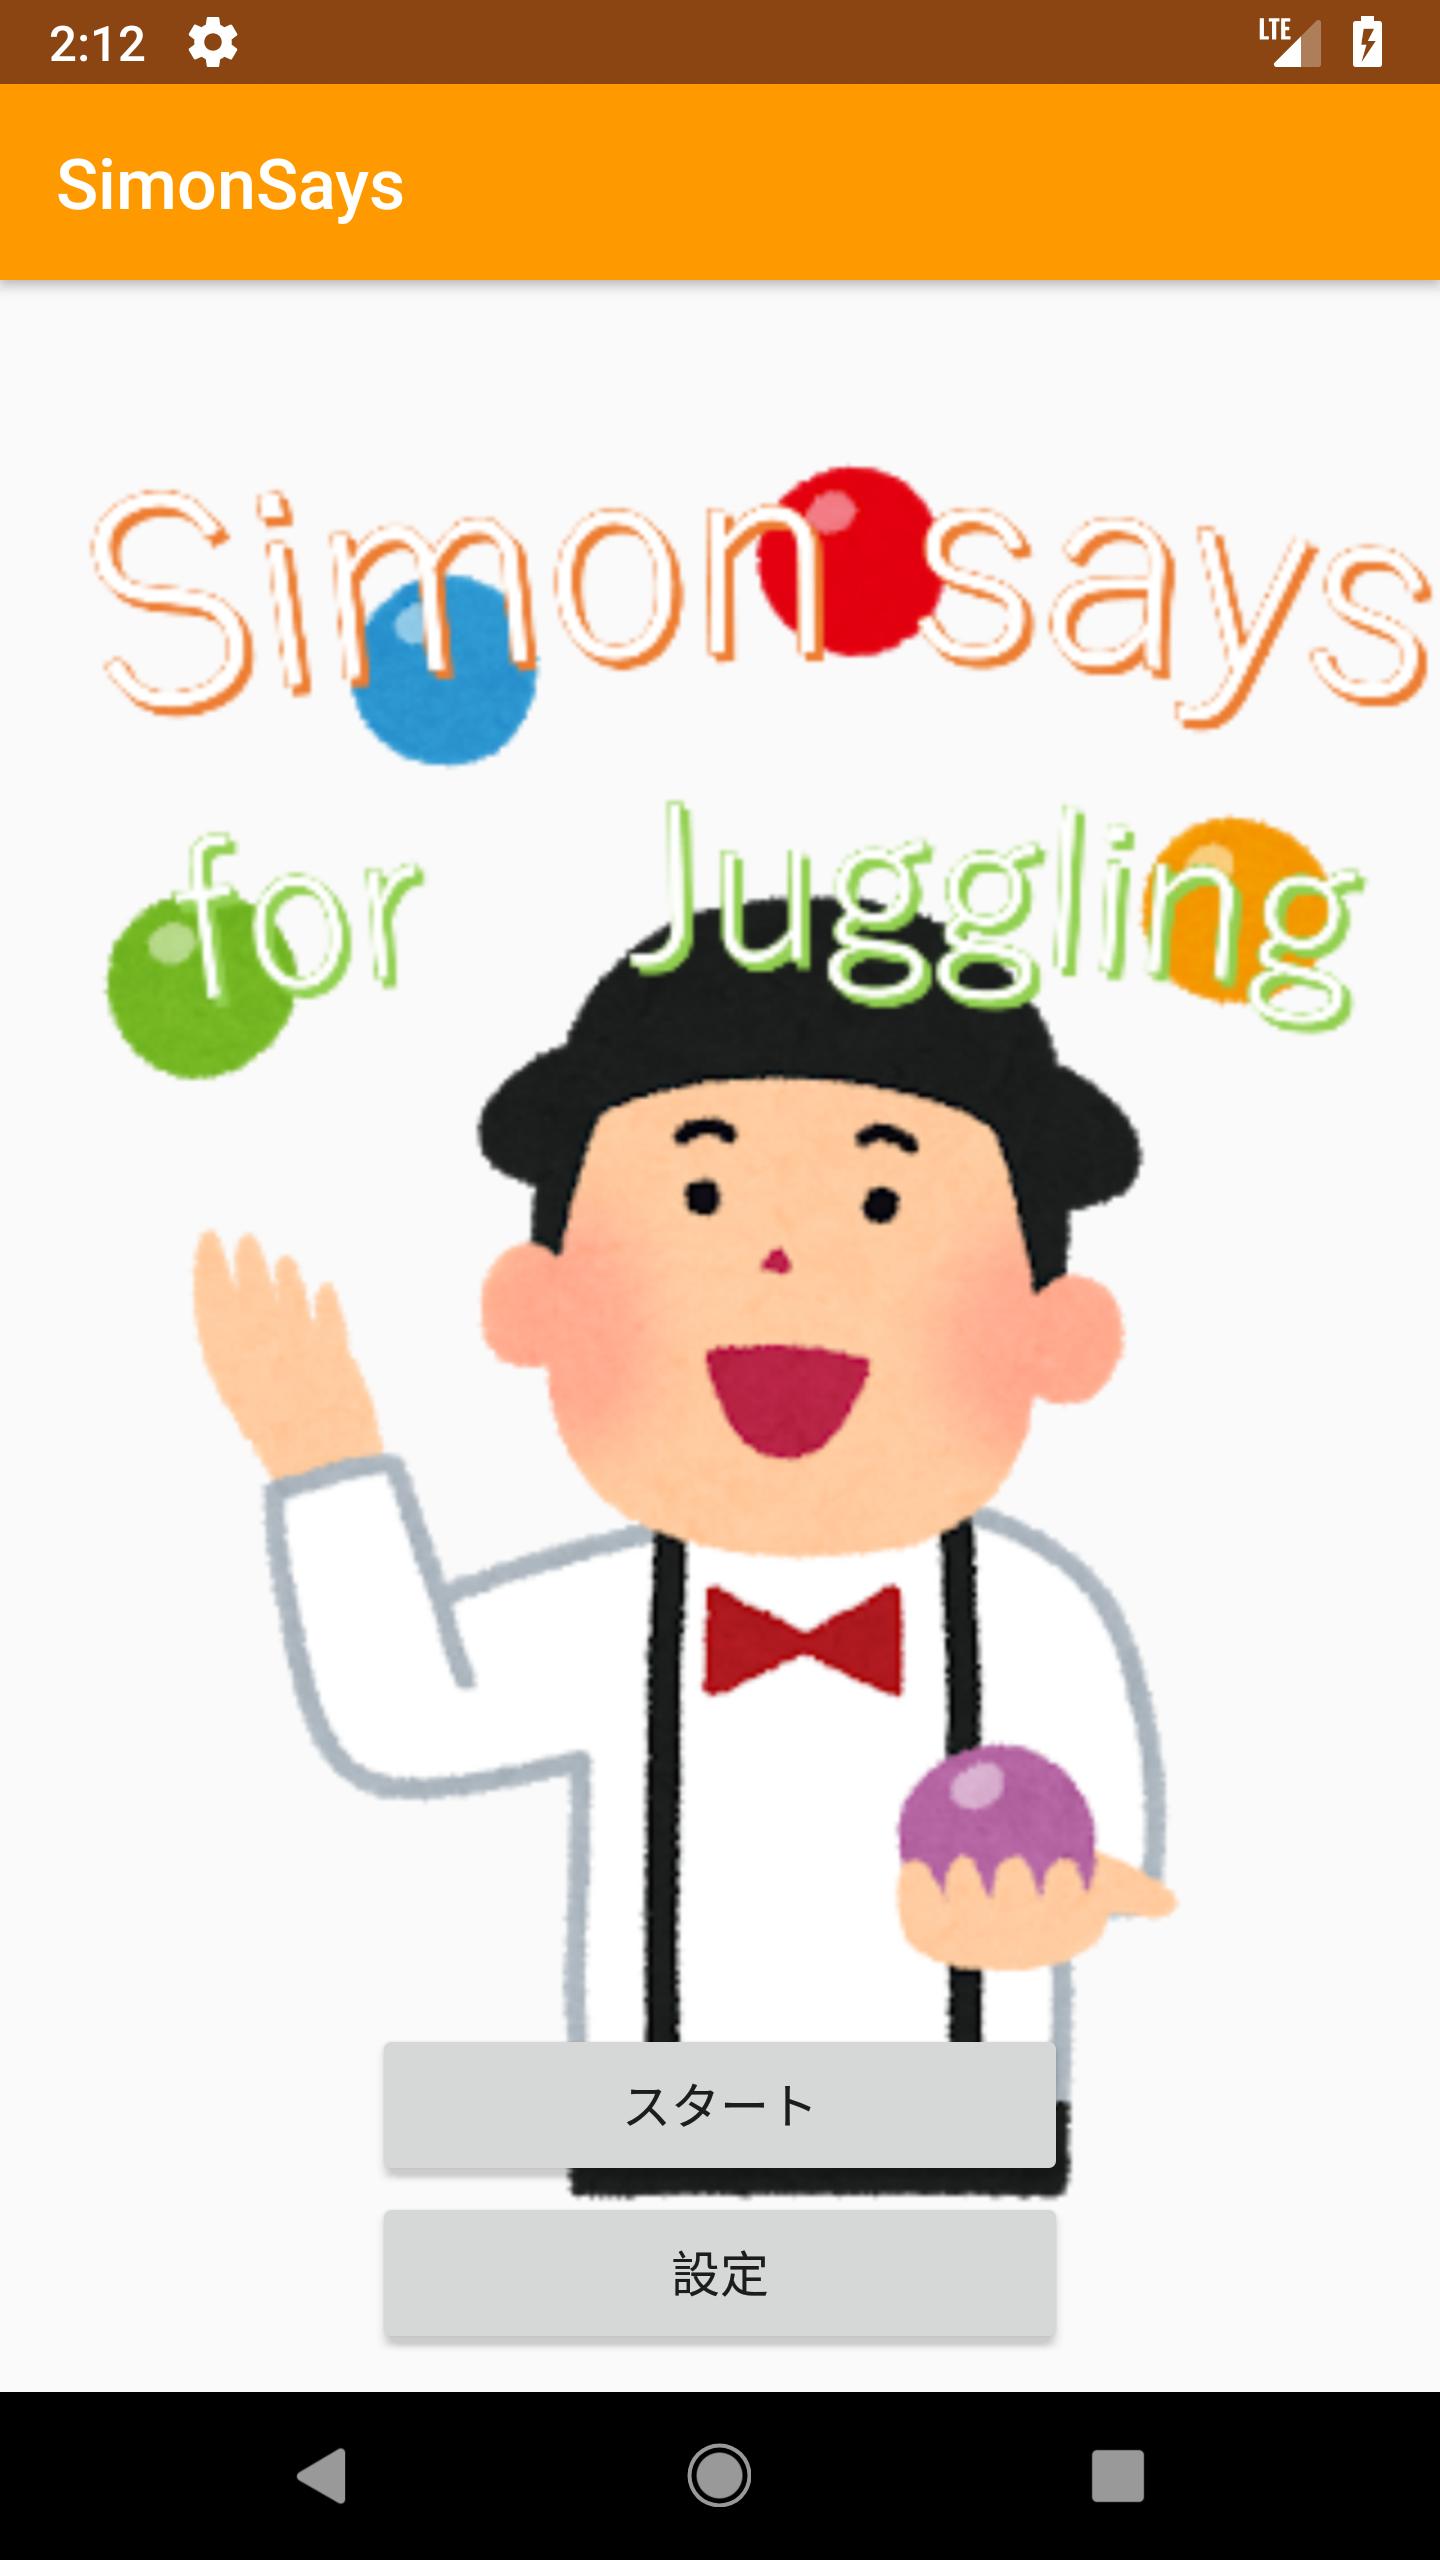 Simon Says For Juggling For Android Apk Download - its has been 2 years since i have played simon says roblox